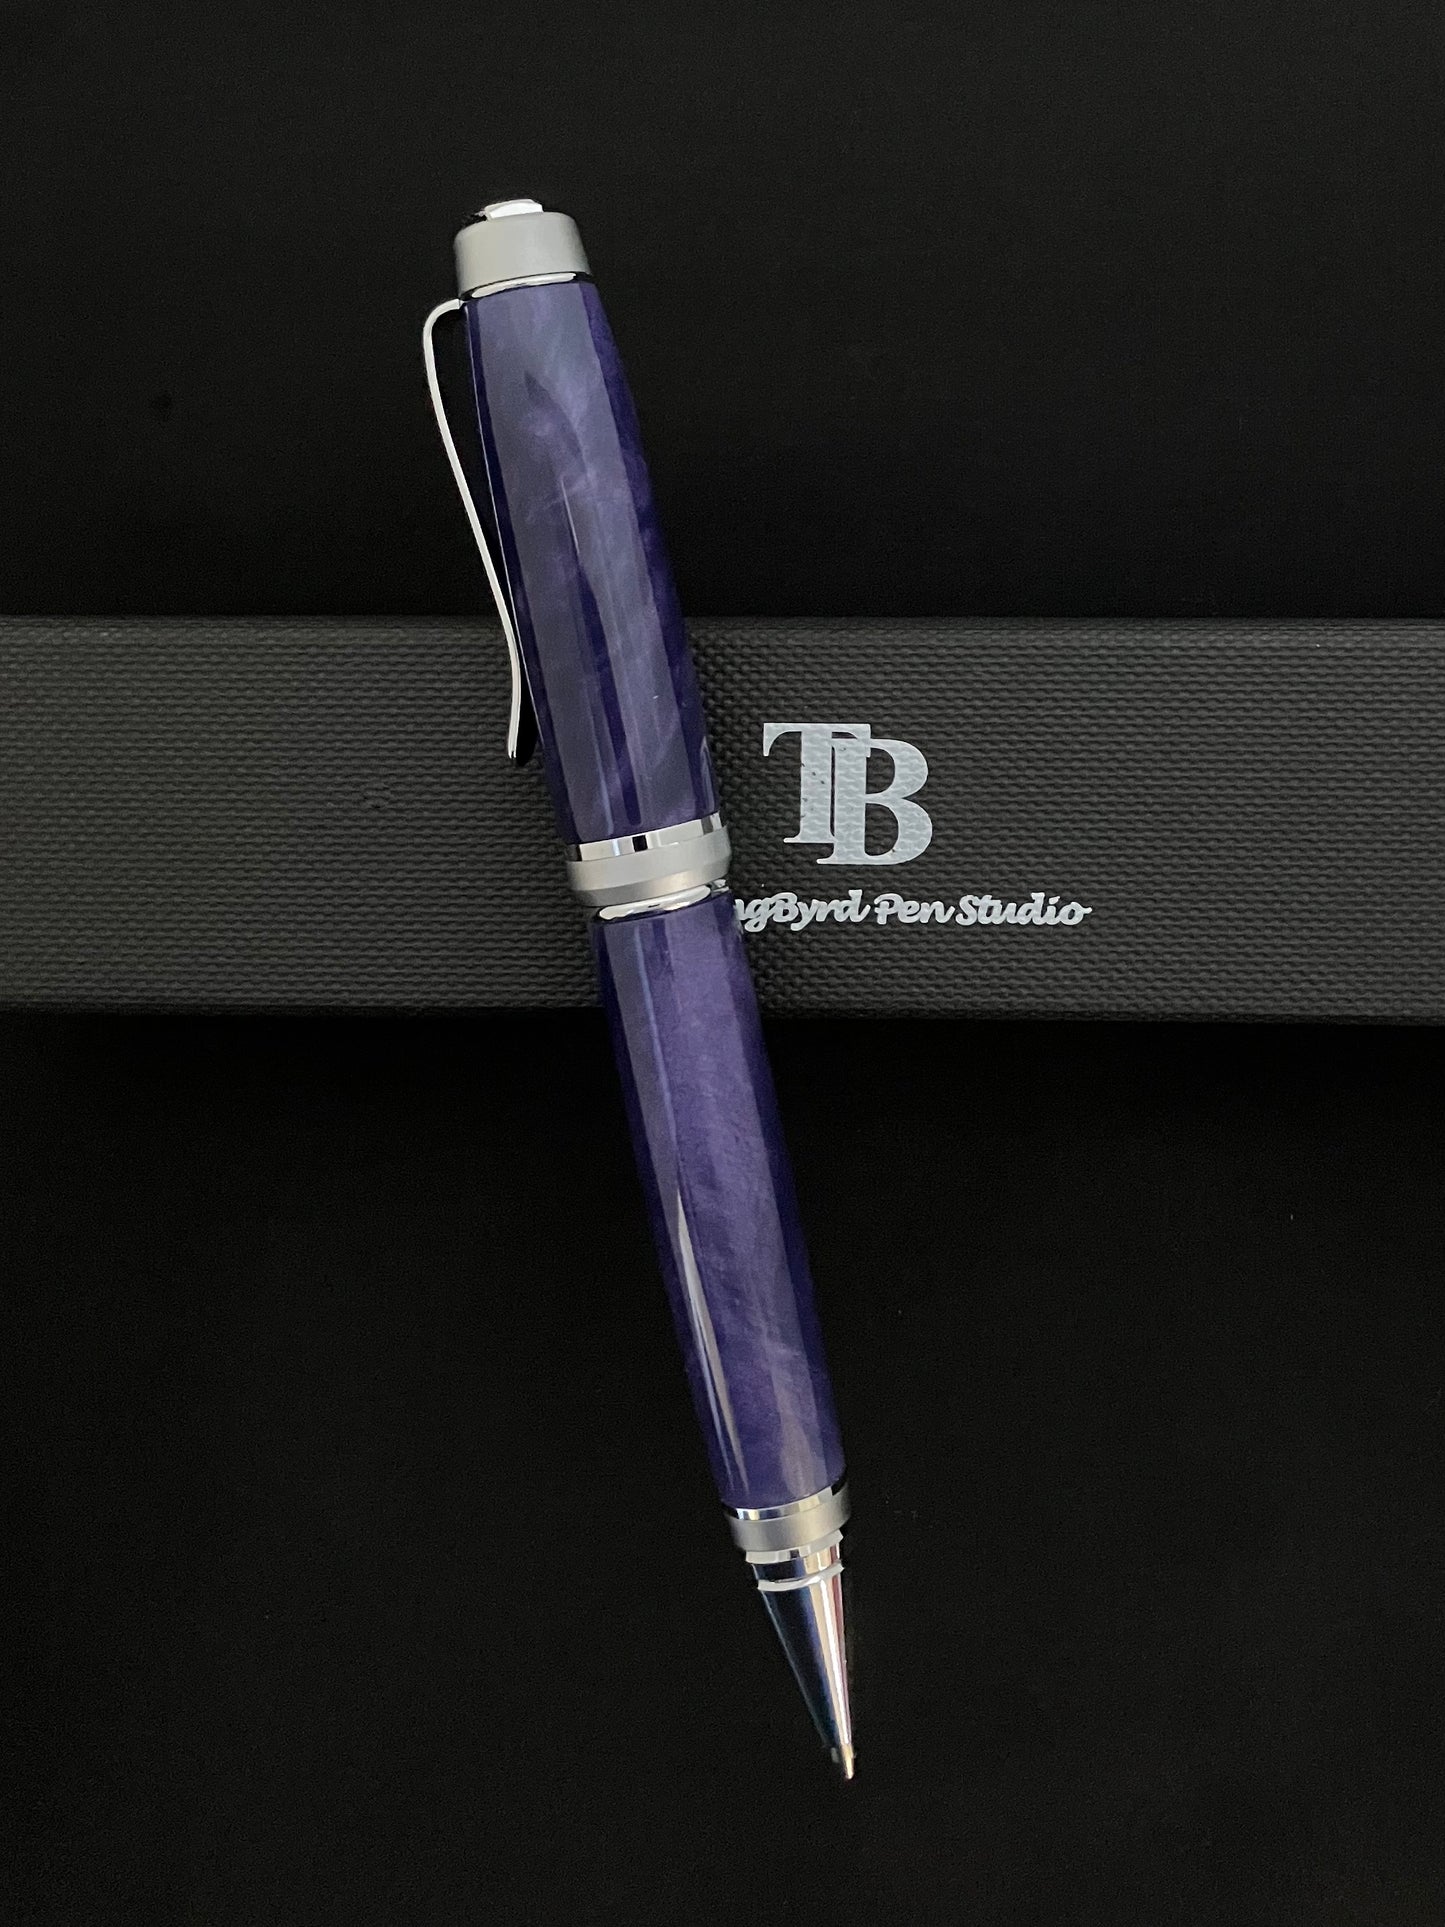 Twist ballpoint pen with Chrome and Satin Chrome plating enhance by sparkling and swirling  purple moon resin barrels!